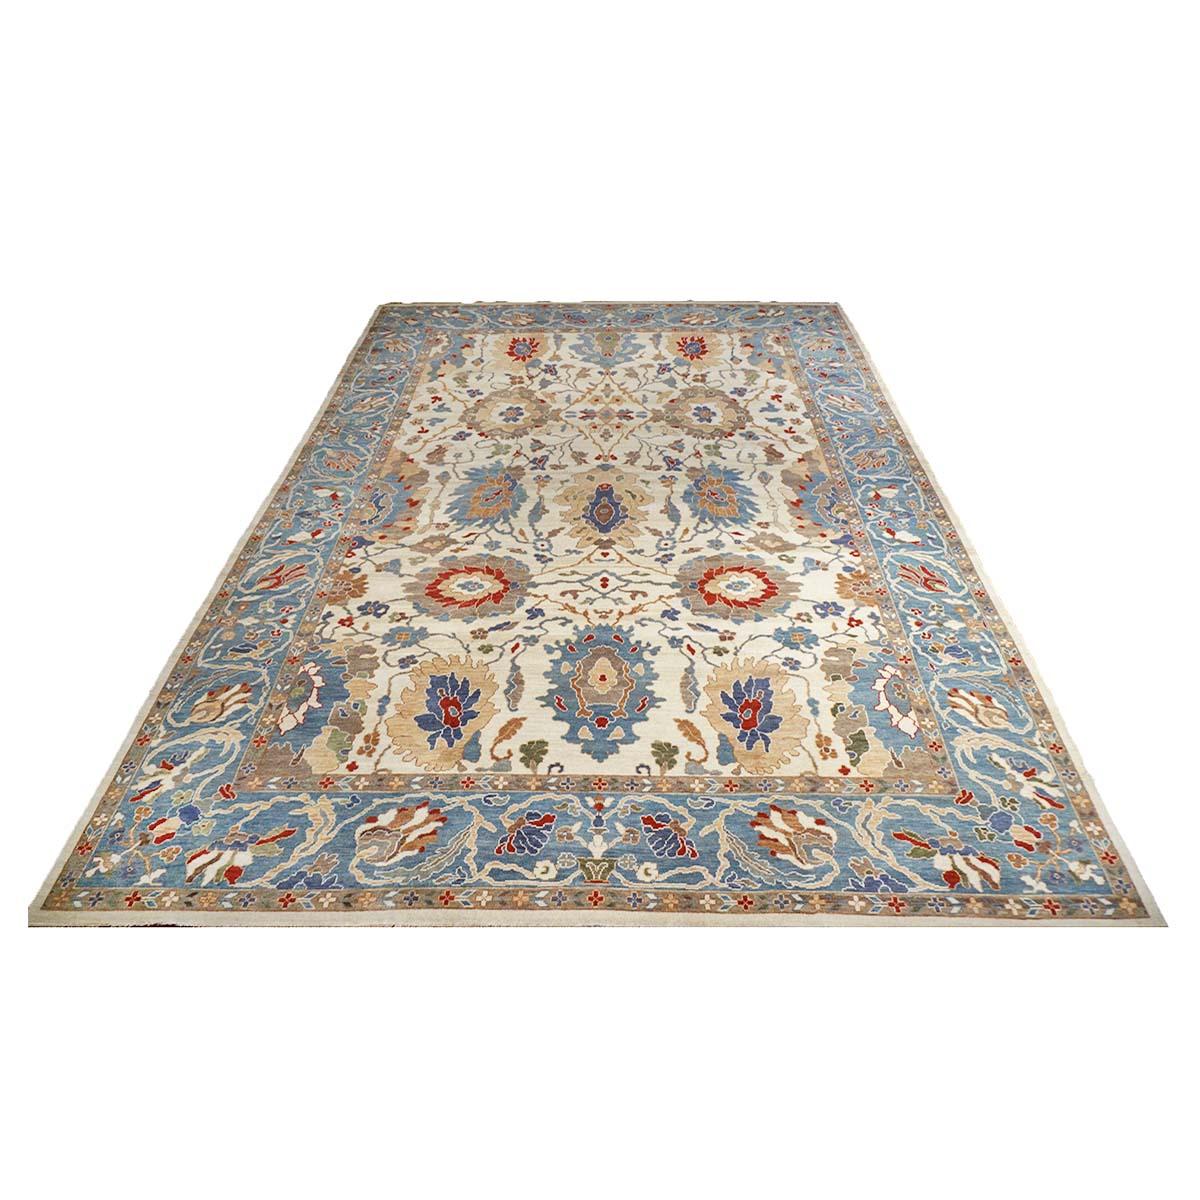 Ashly Fine Rugs presents an antique recreation of an original Persian Sultanabad 10x14 Blue & Ivory Handmade Area Rug. Part of our own previous production, this antique recreation was thought of and created in-house and 100% handmade in Afghanistan